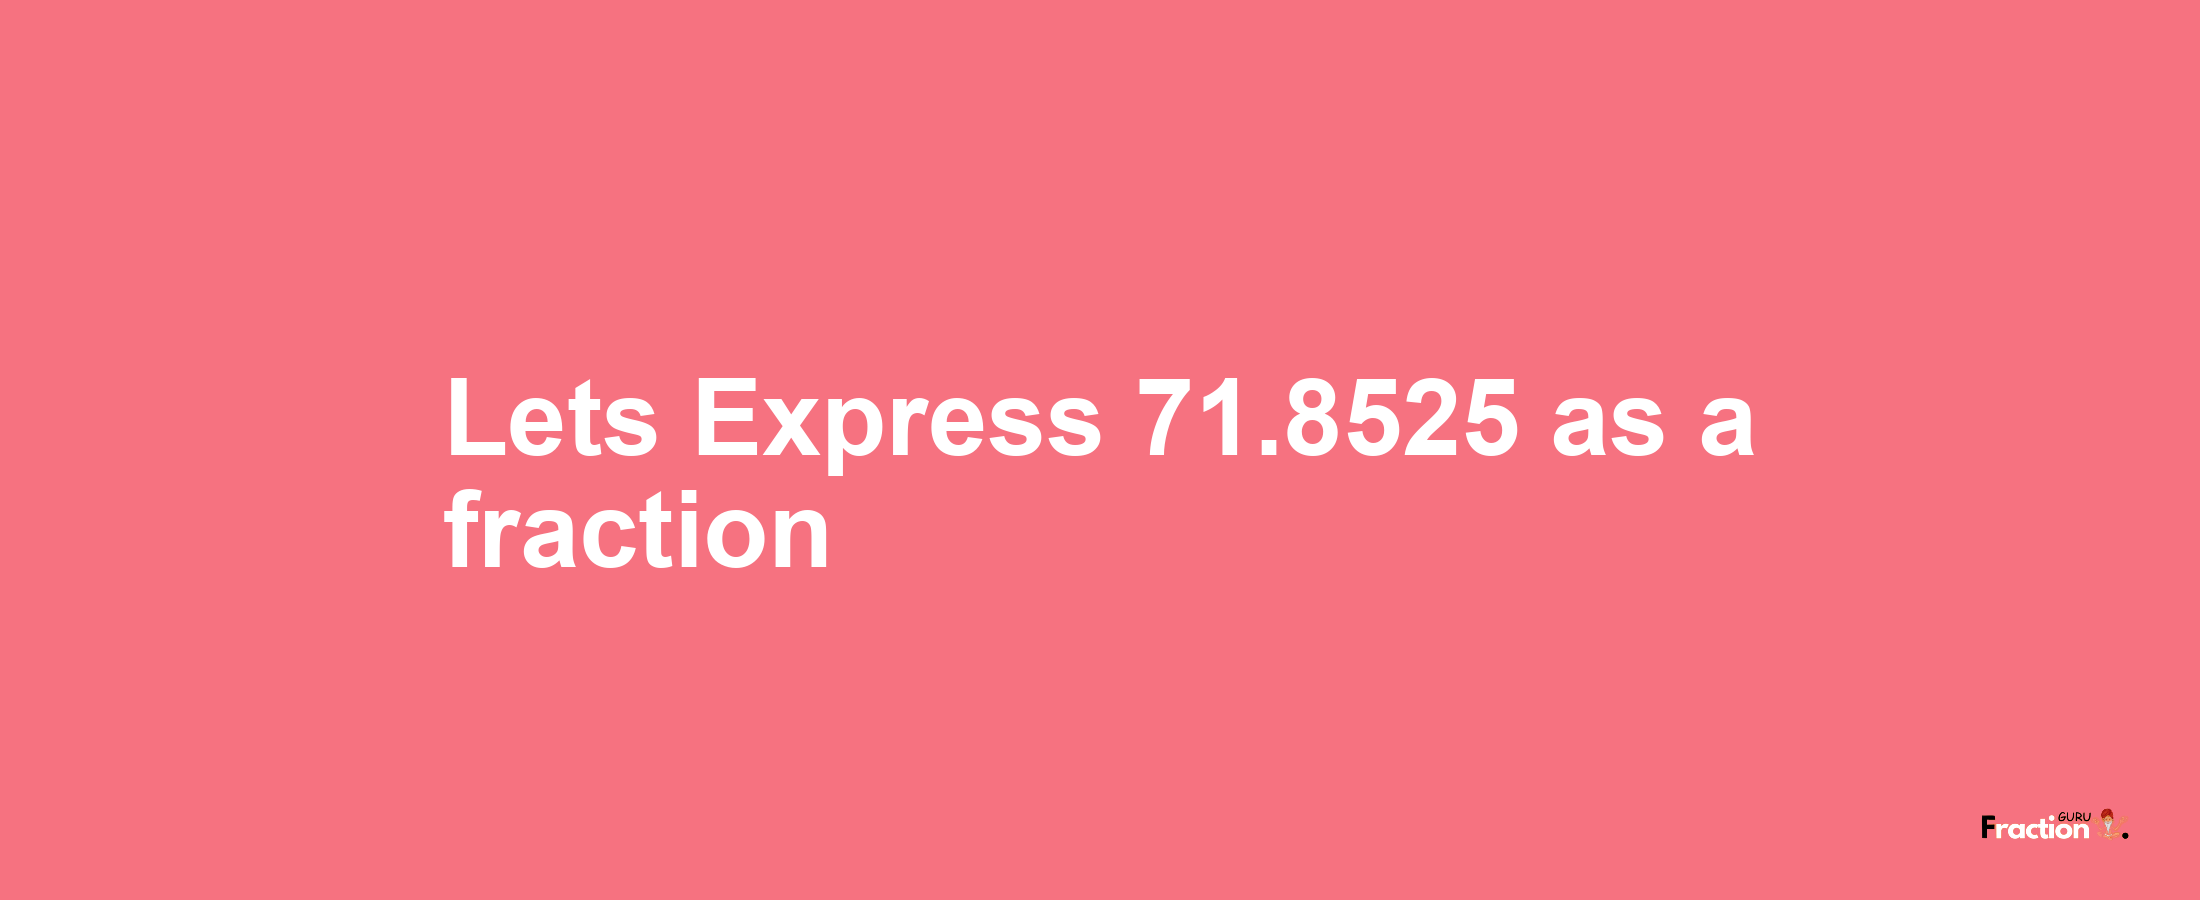 Lets Express 71.8525 as afraction